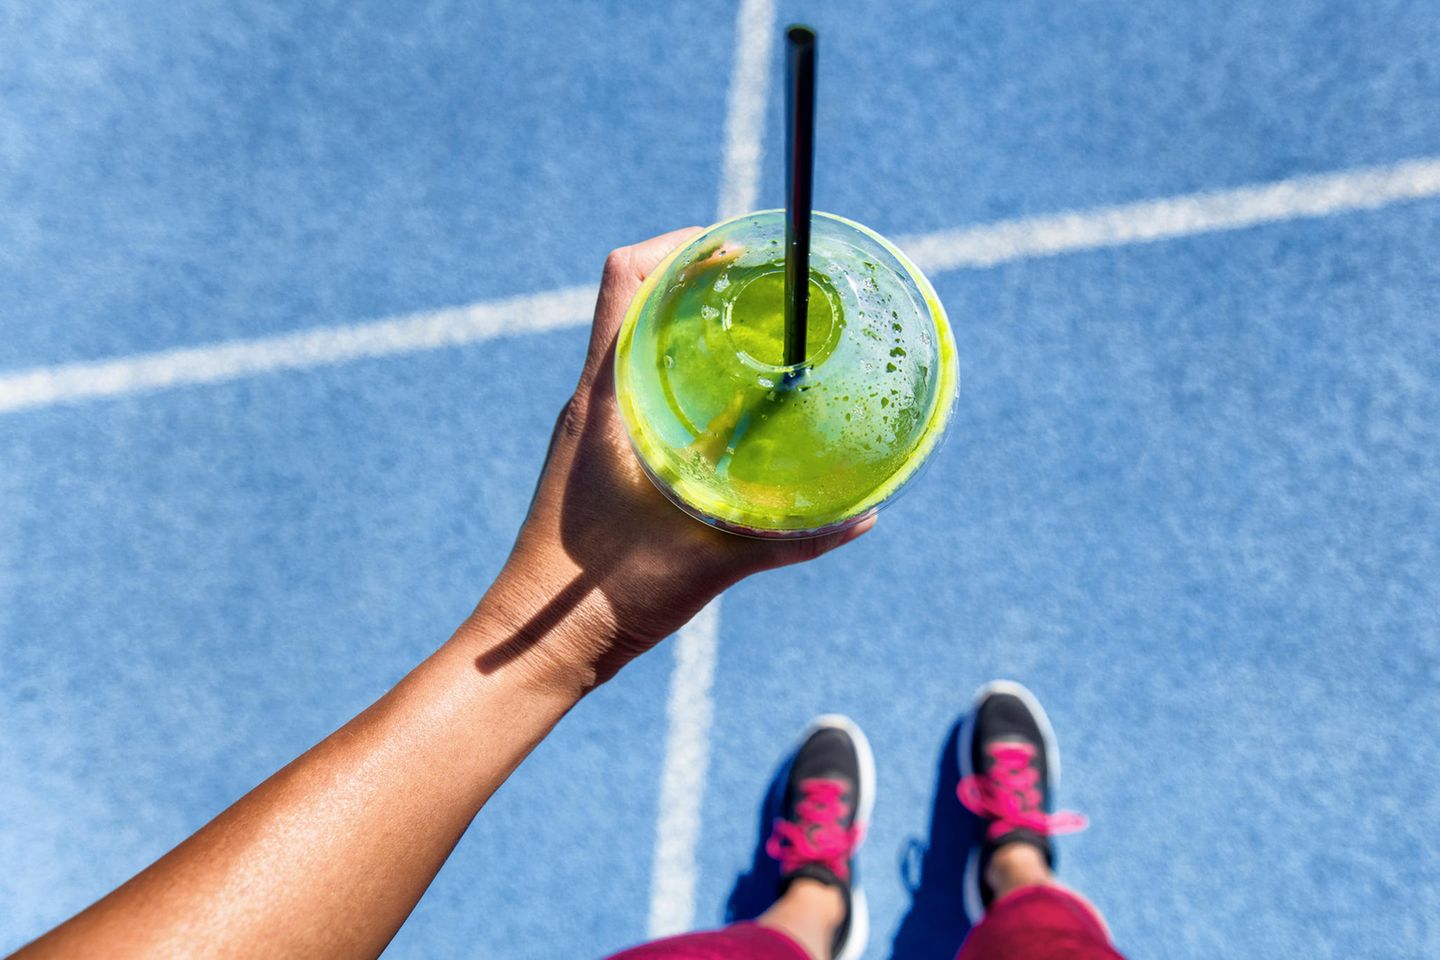 Shake during training: It is best not to eat these foods before exercising